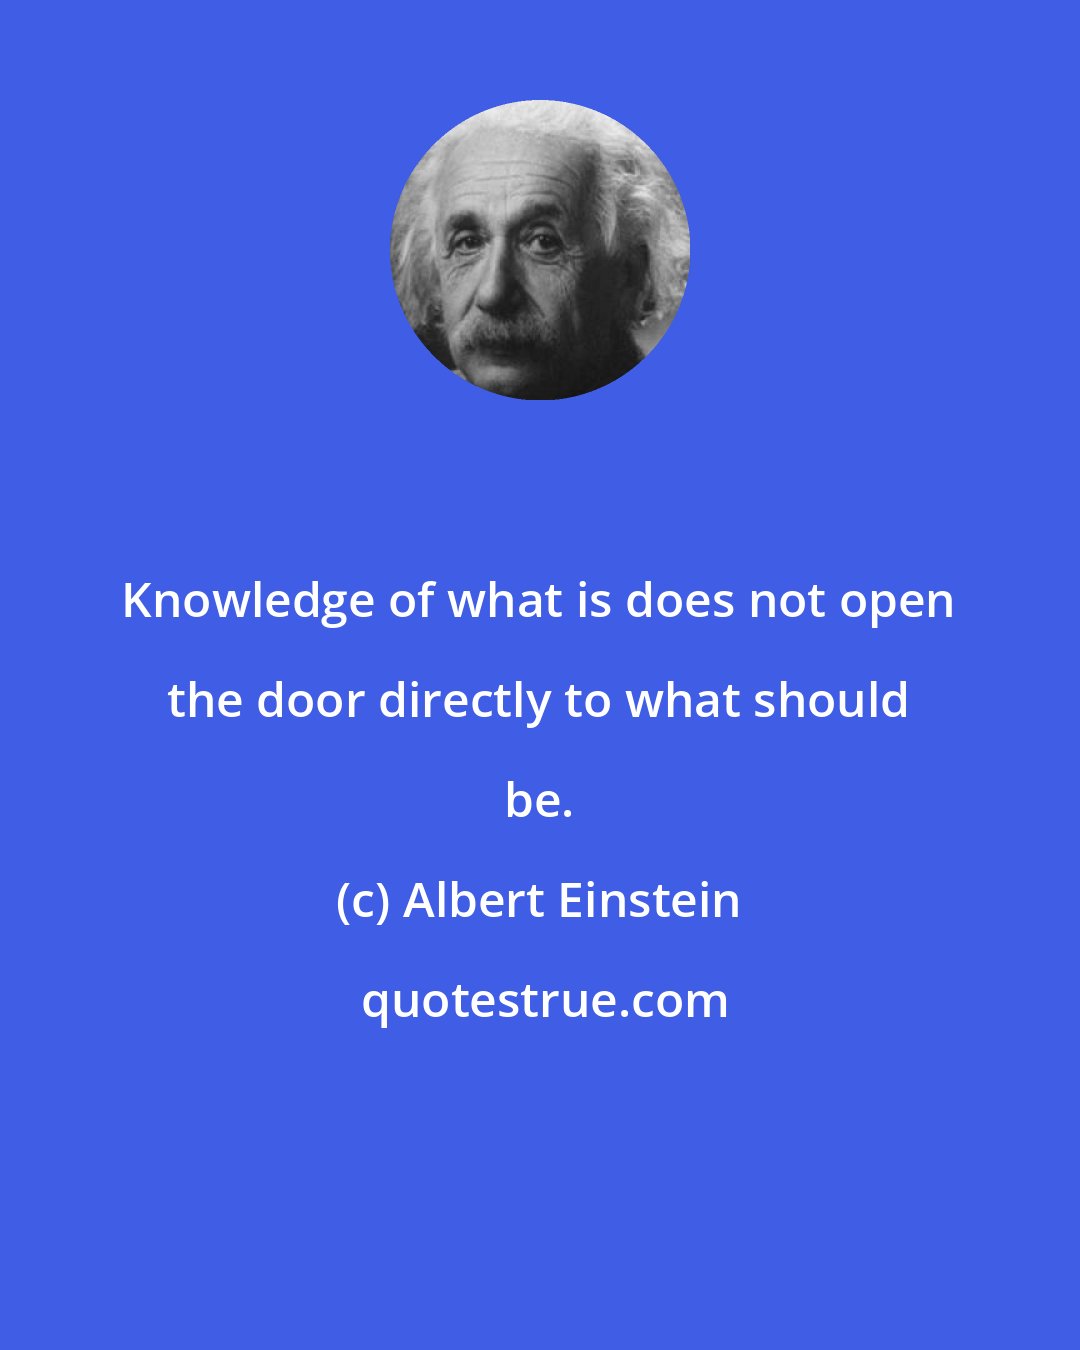 Albert Einstein: Knowledge of what is does not open the door directly to what should be.